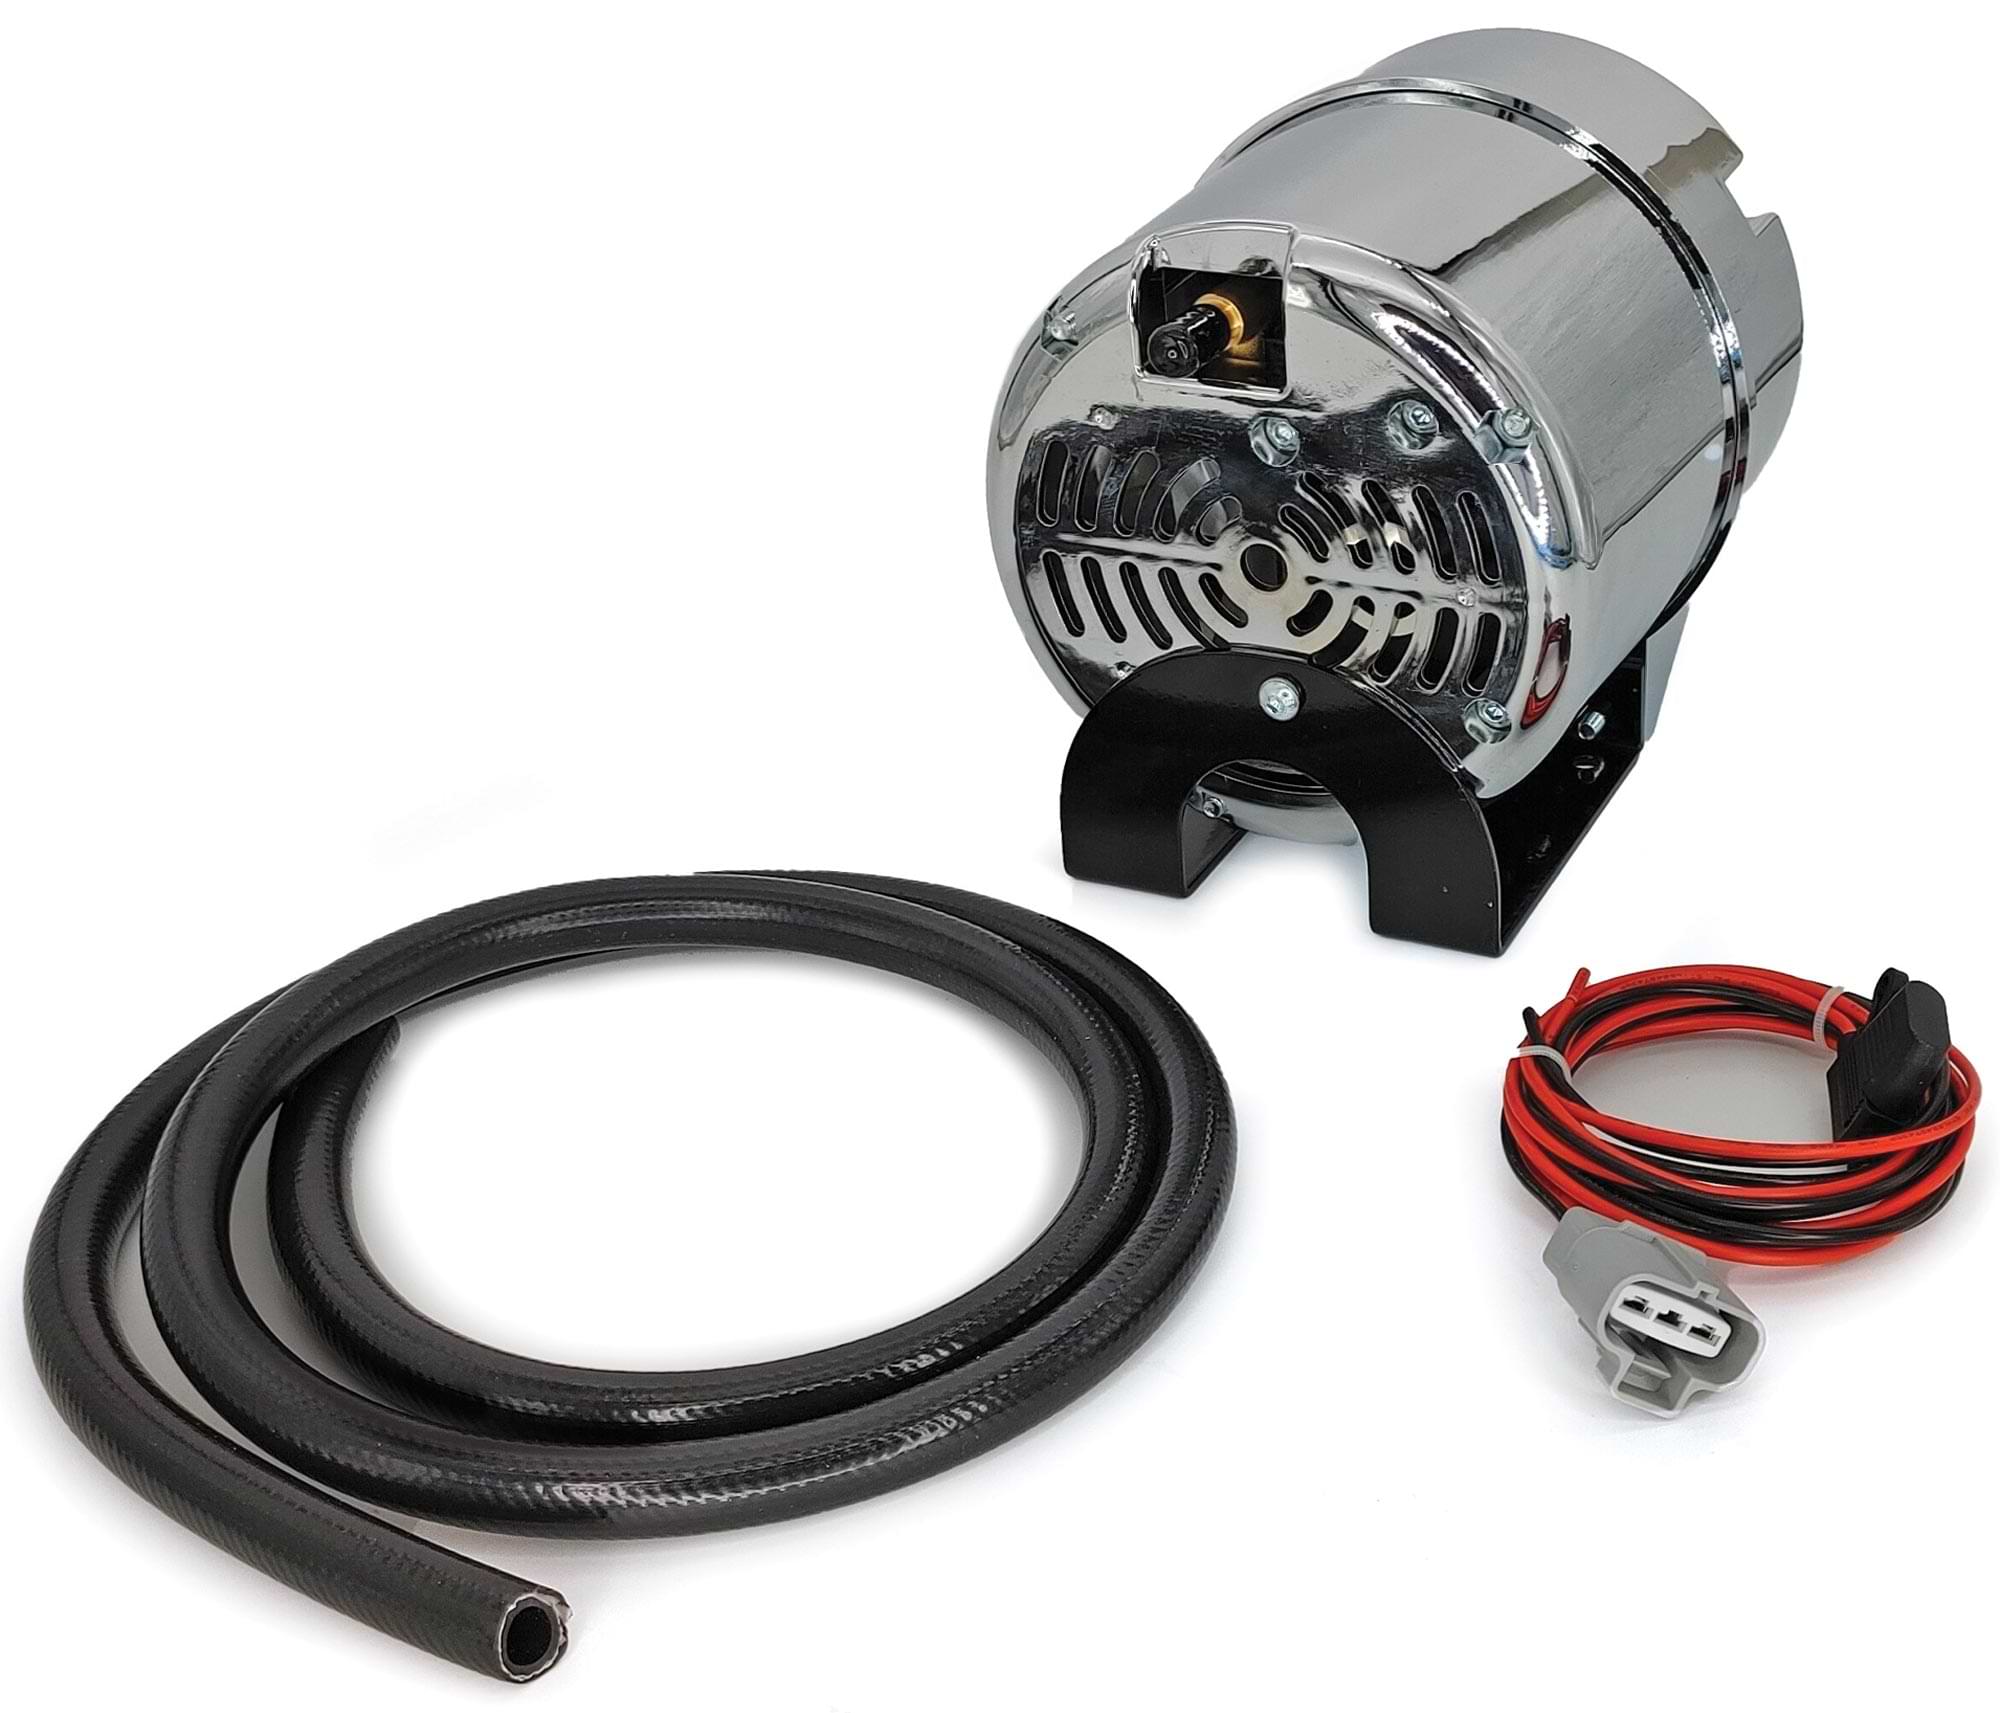 the Granatelli Motor Sports 12V Electric Vacuum Pump Kit parts laid out